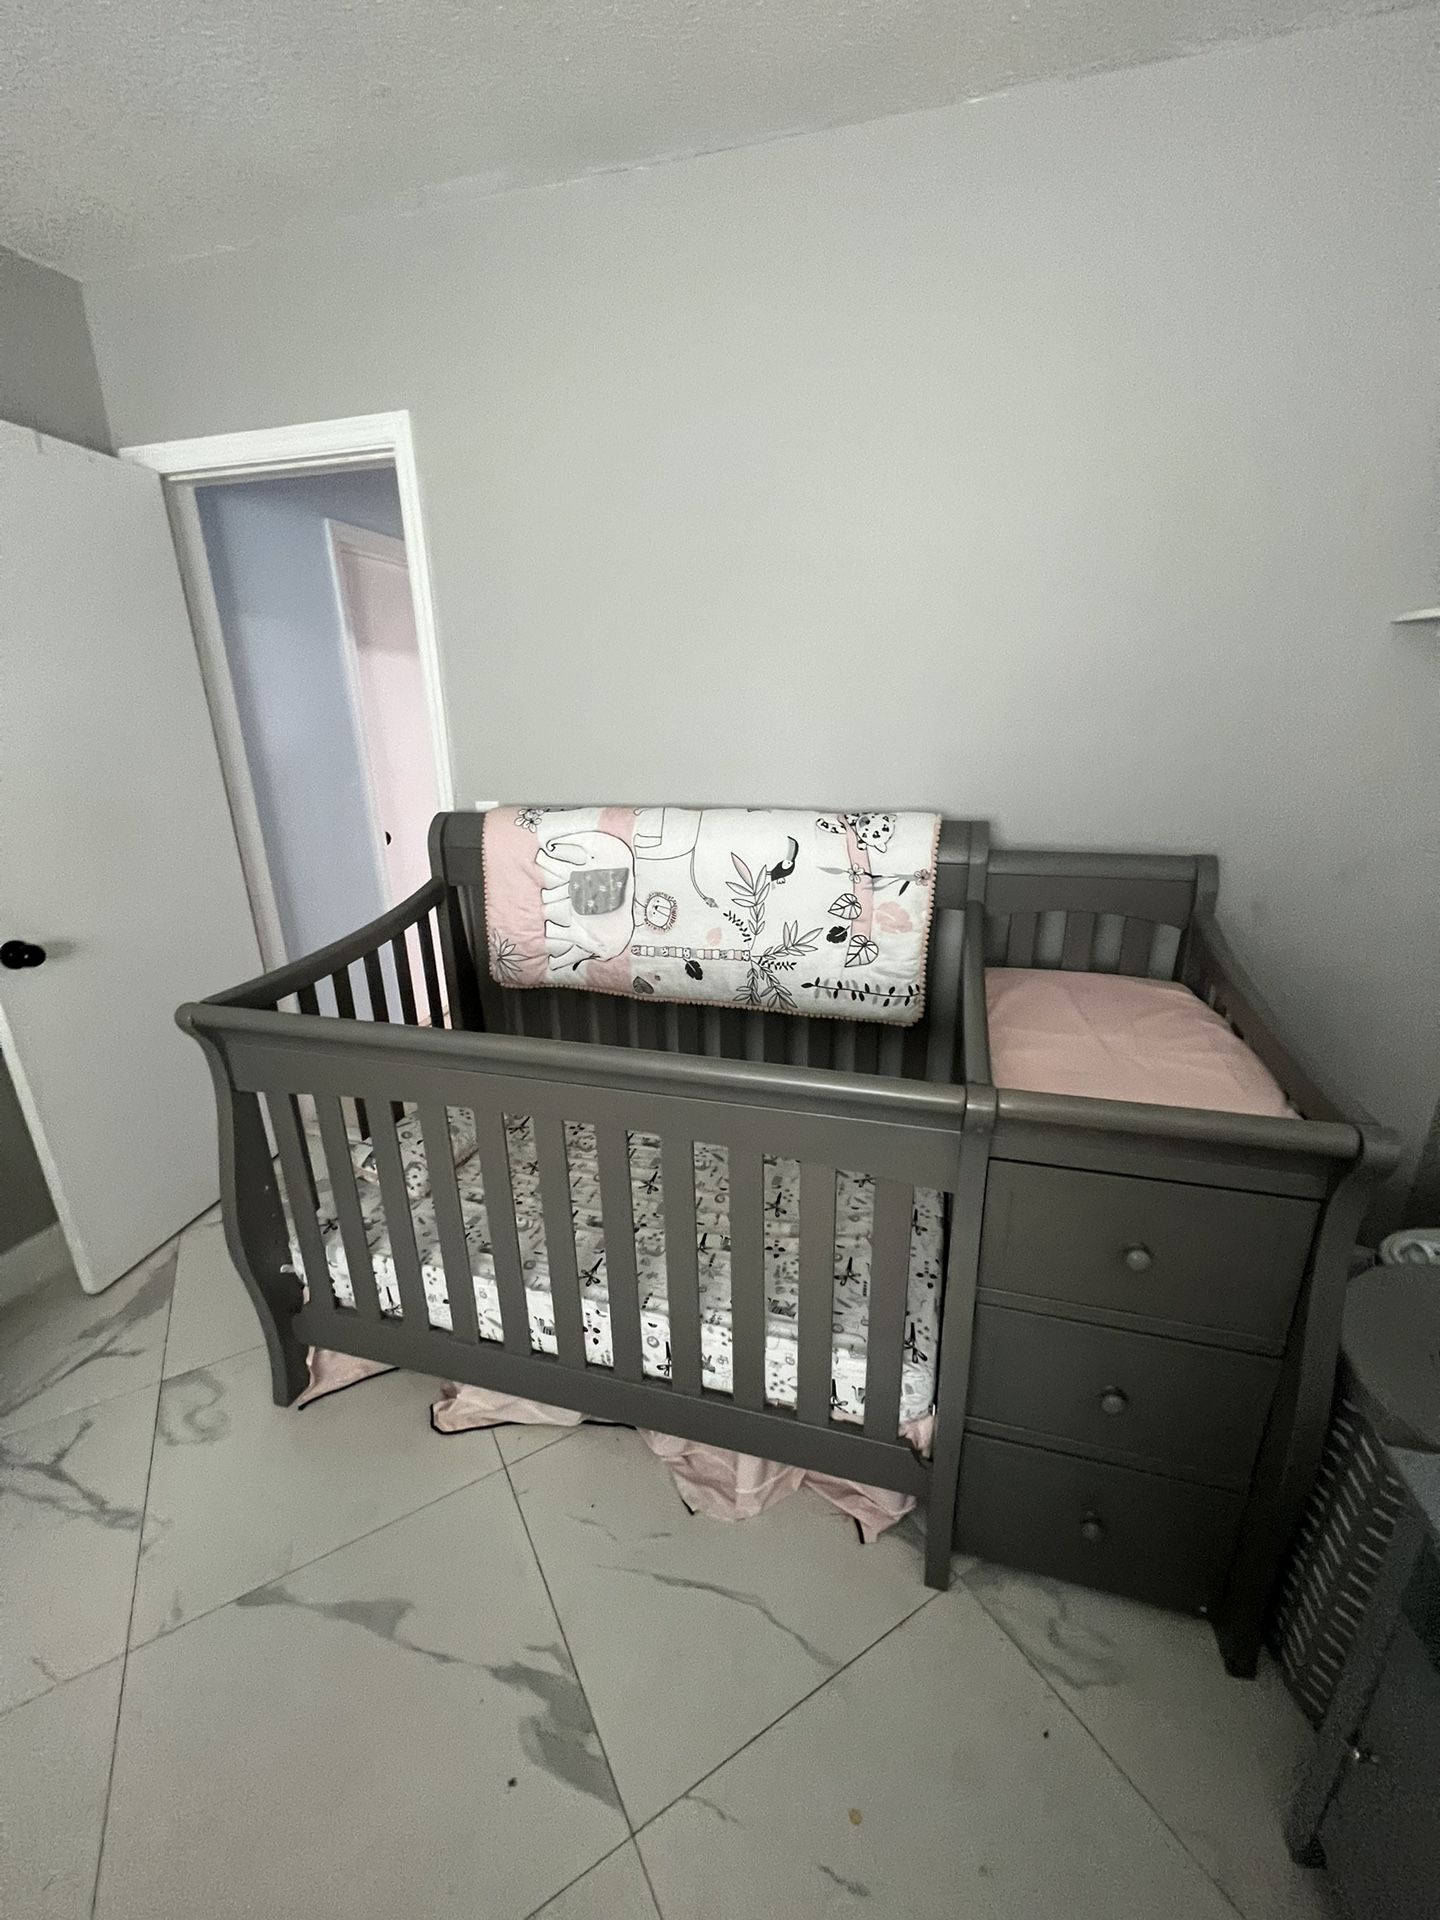 Delta 4-1 Crib With Changing Table And Mattress 